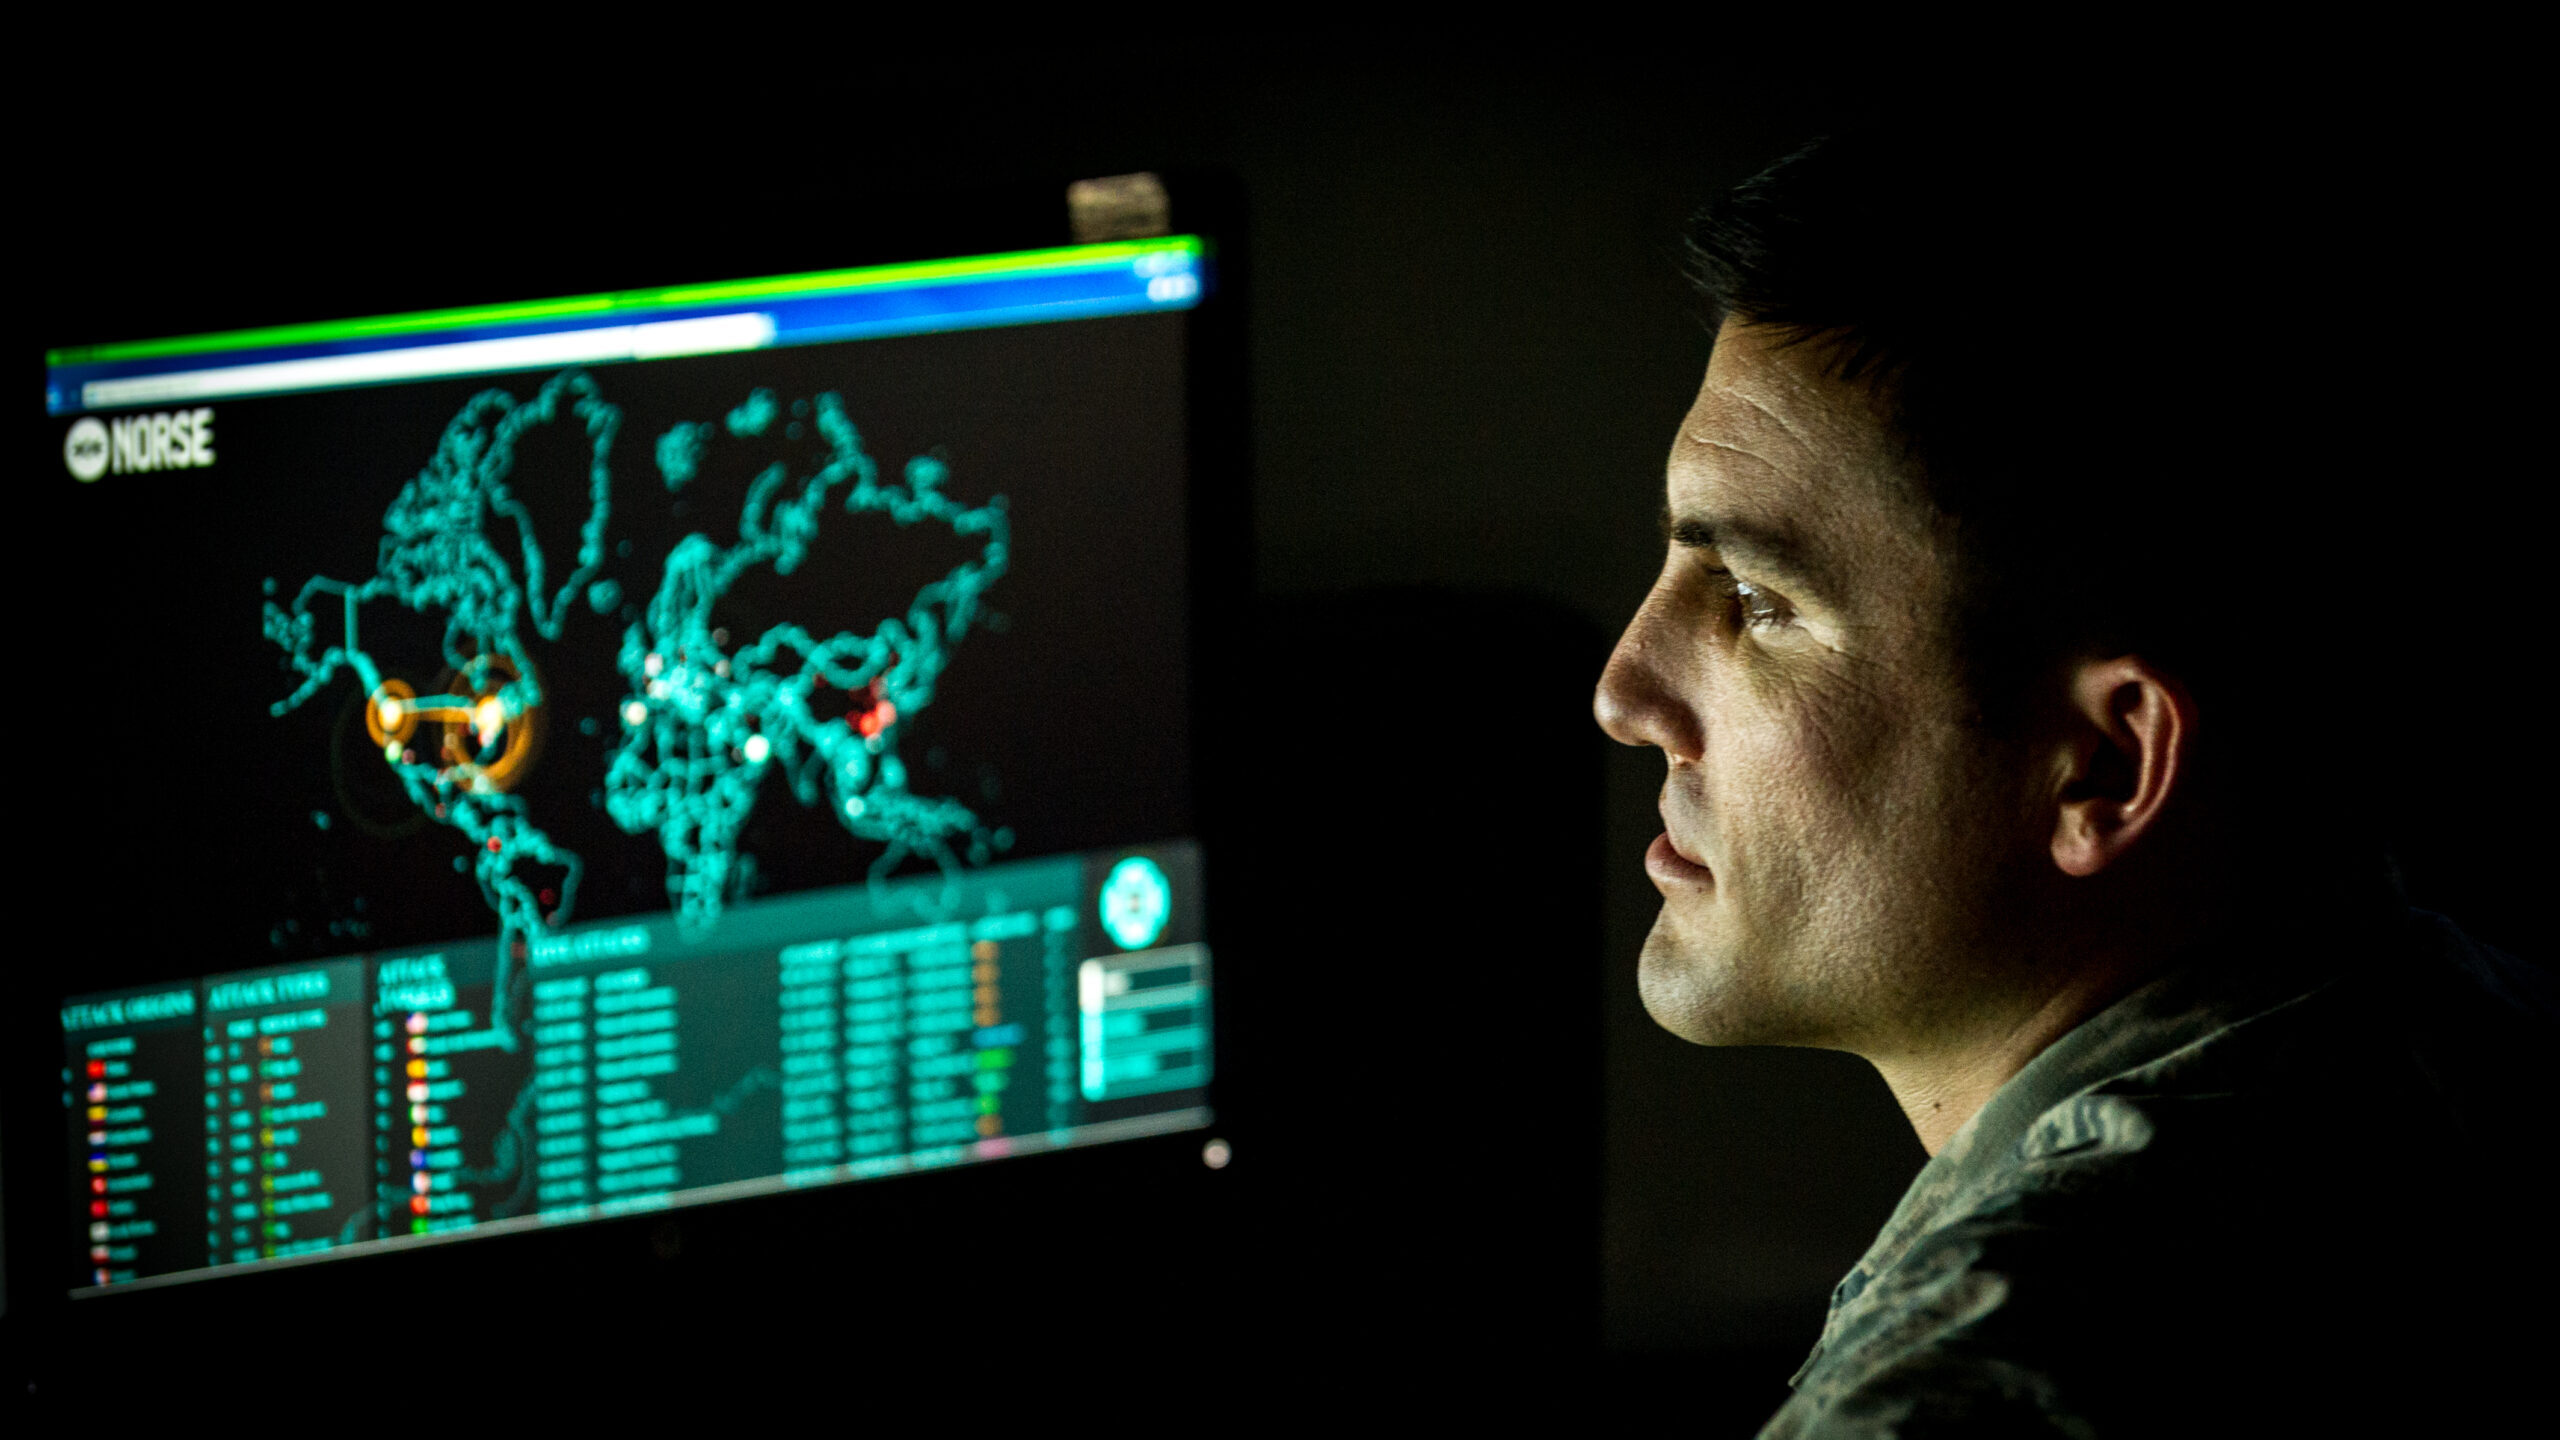 Offset-X: Now is the time for the Pentagon to change how it approaches technology